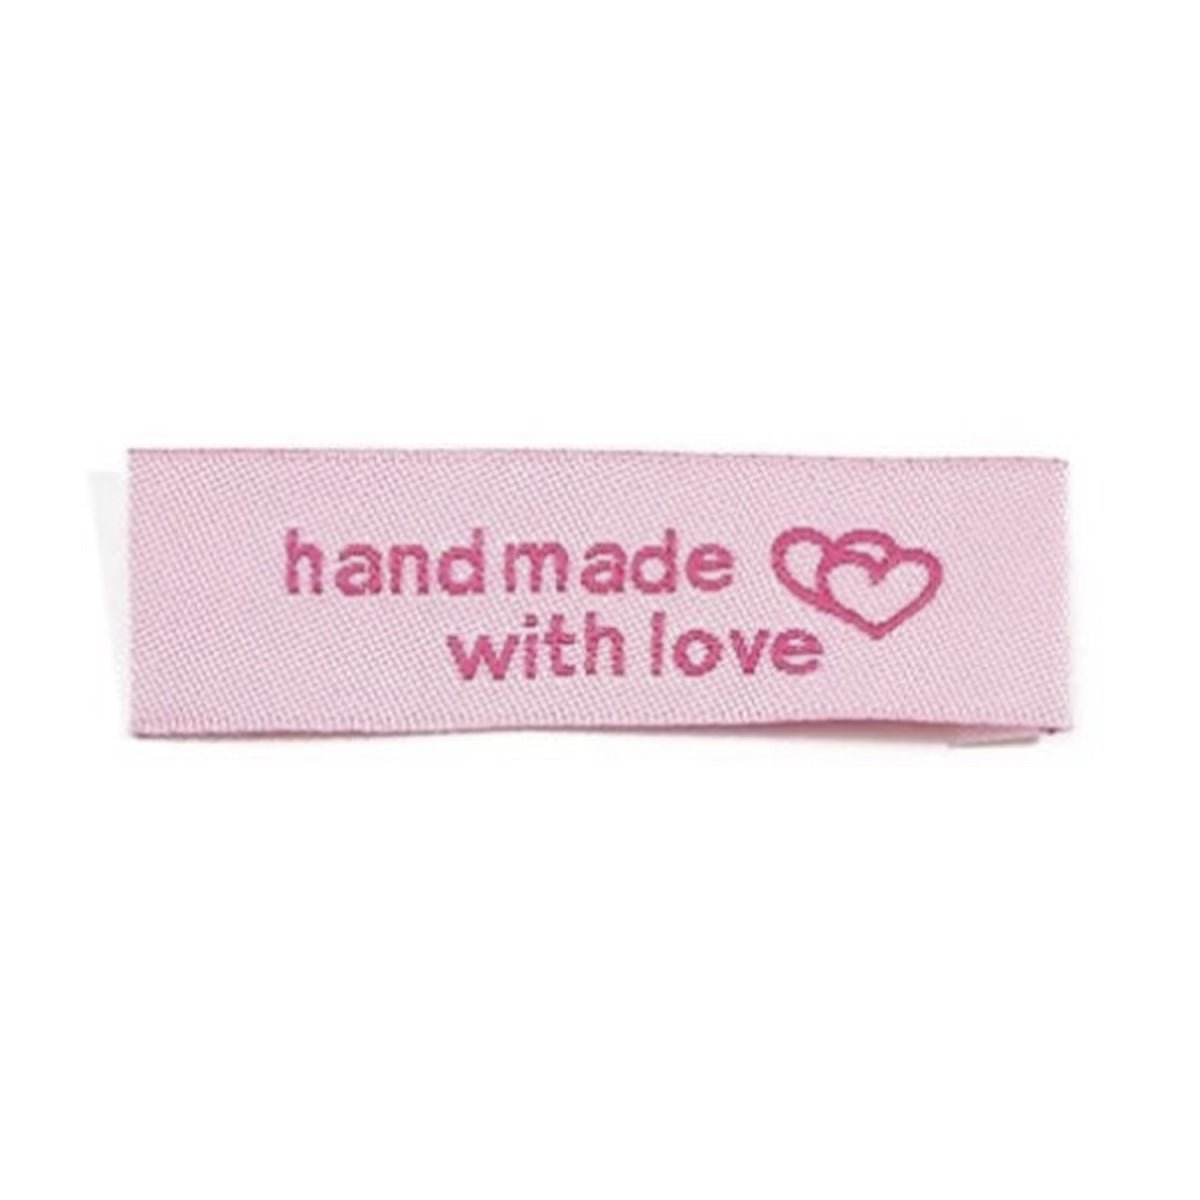 100pcs Sewing Tags Clothing Labels Cloth Fabric "Handmade with Love" Bags DIY - Pink - Asia Sell